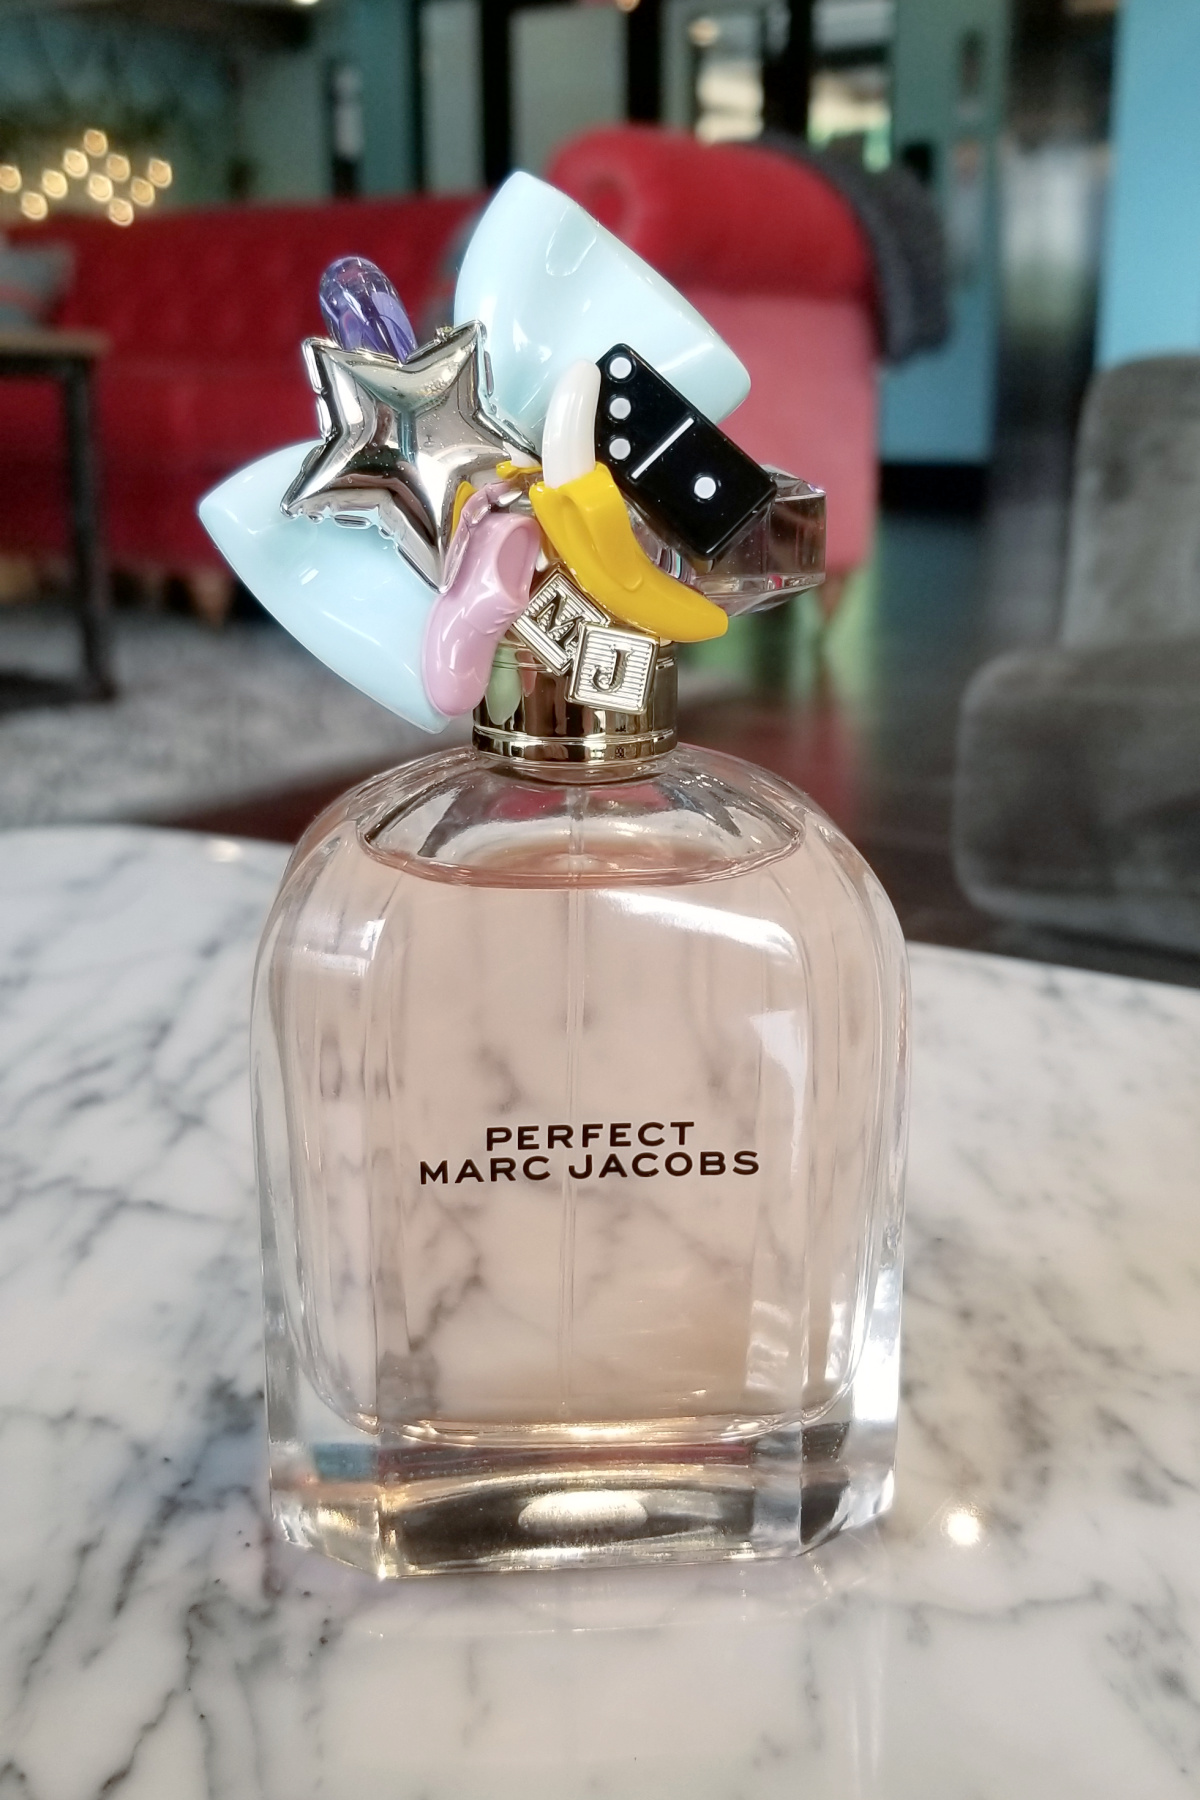 Perfect by Marc Jacobs perfume bottle